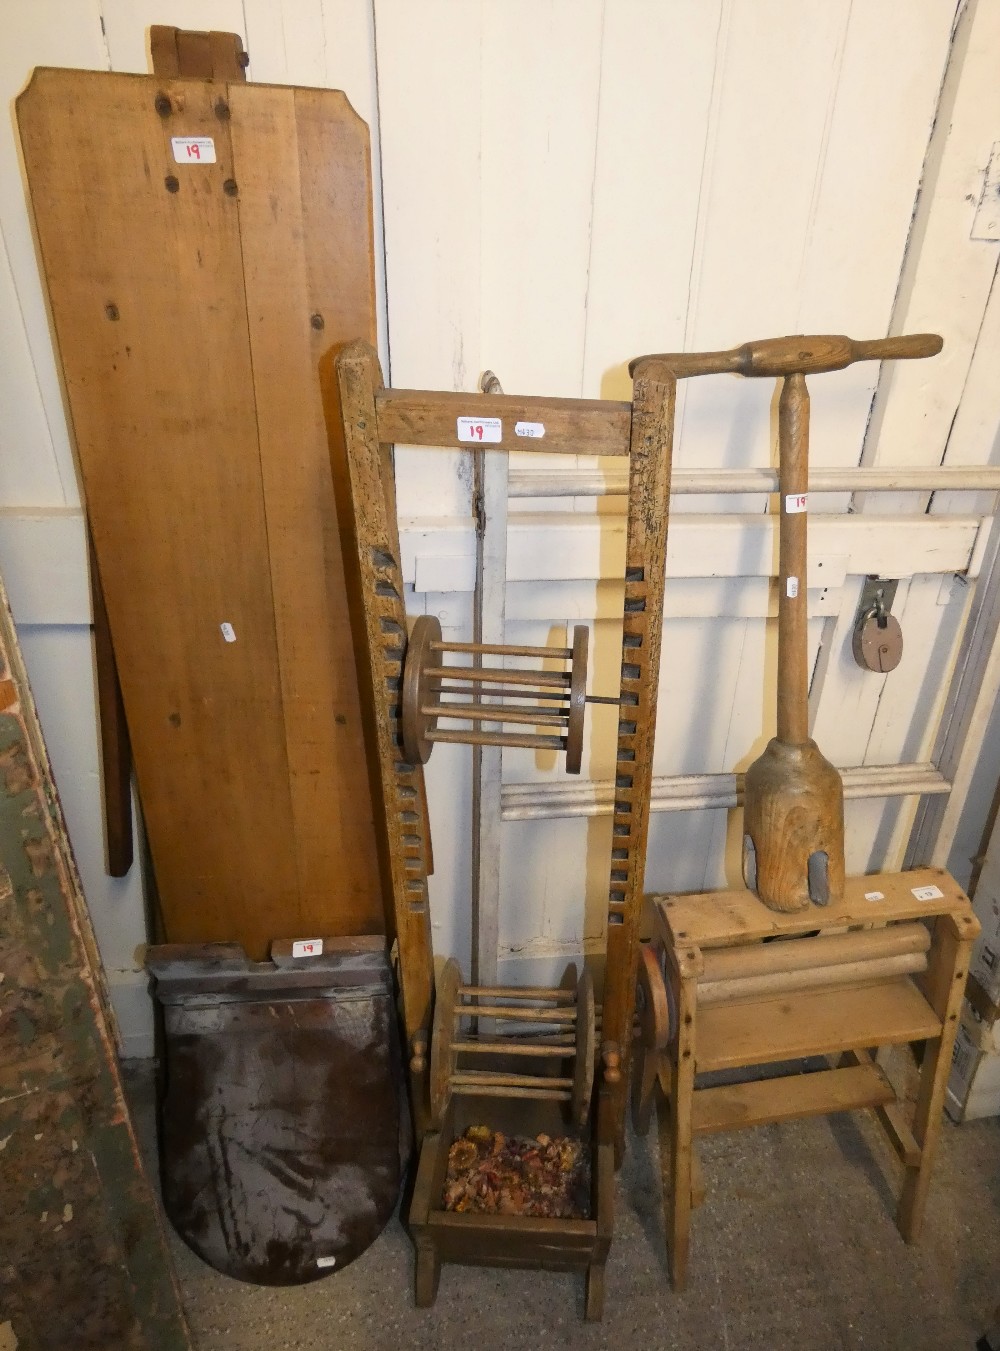 A pine mangle and poshe possibly a wool winder, vintage ironing board and toilet seat